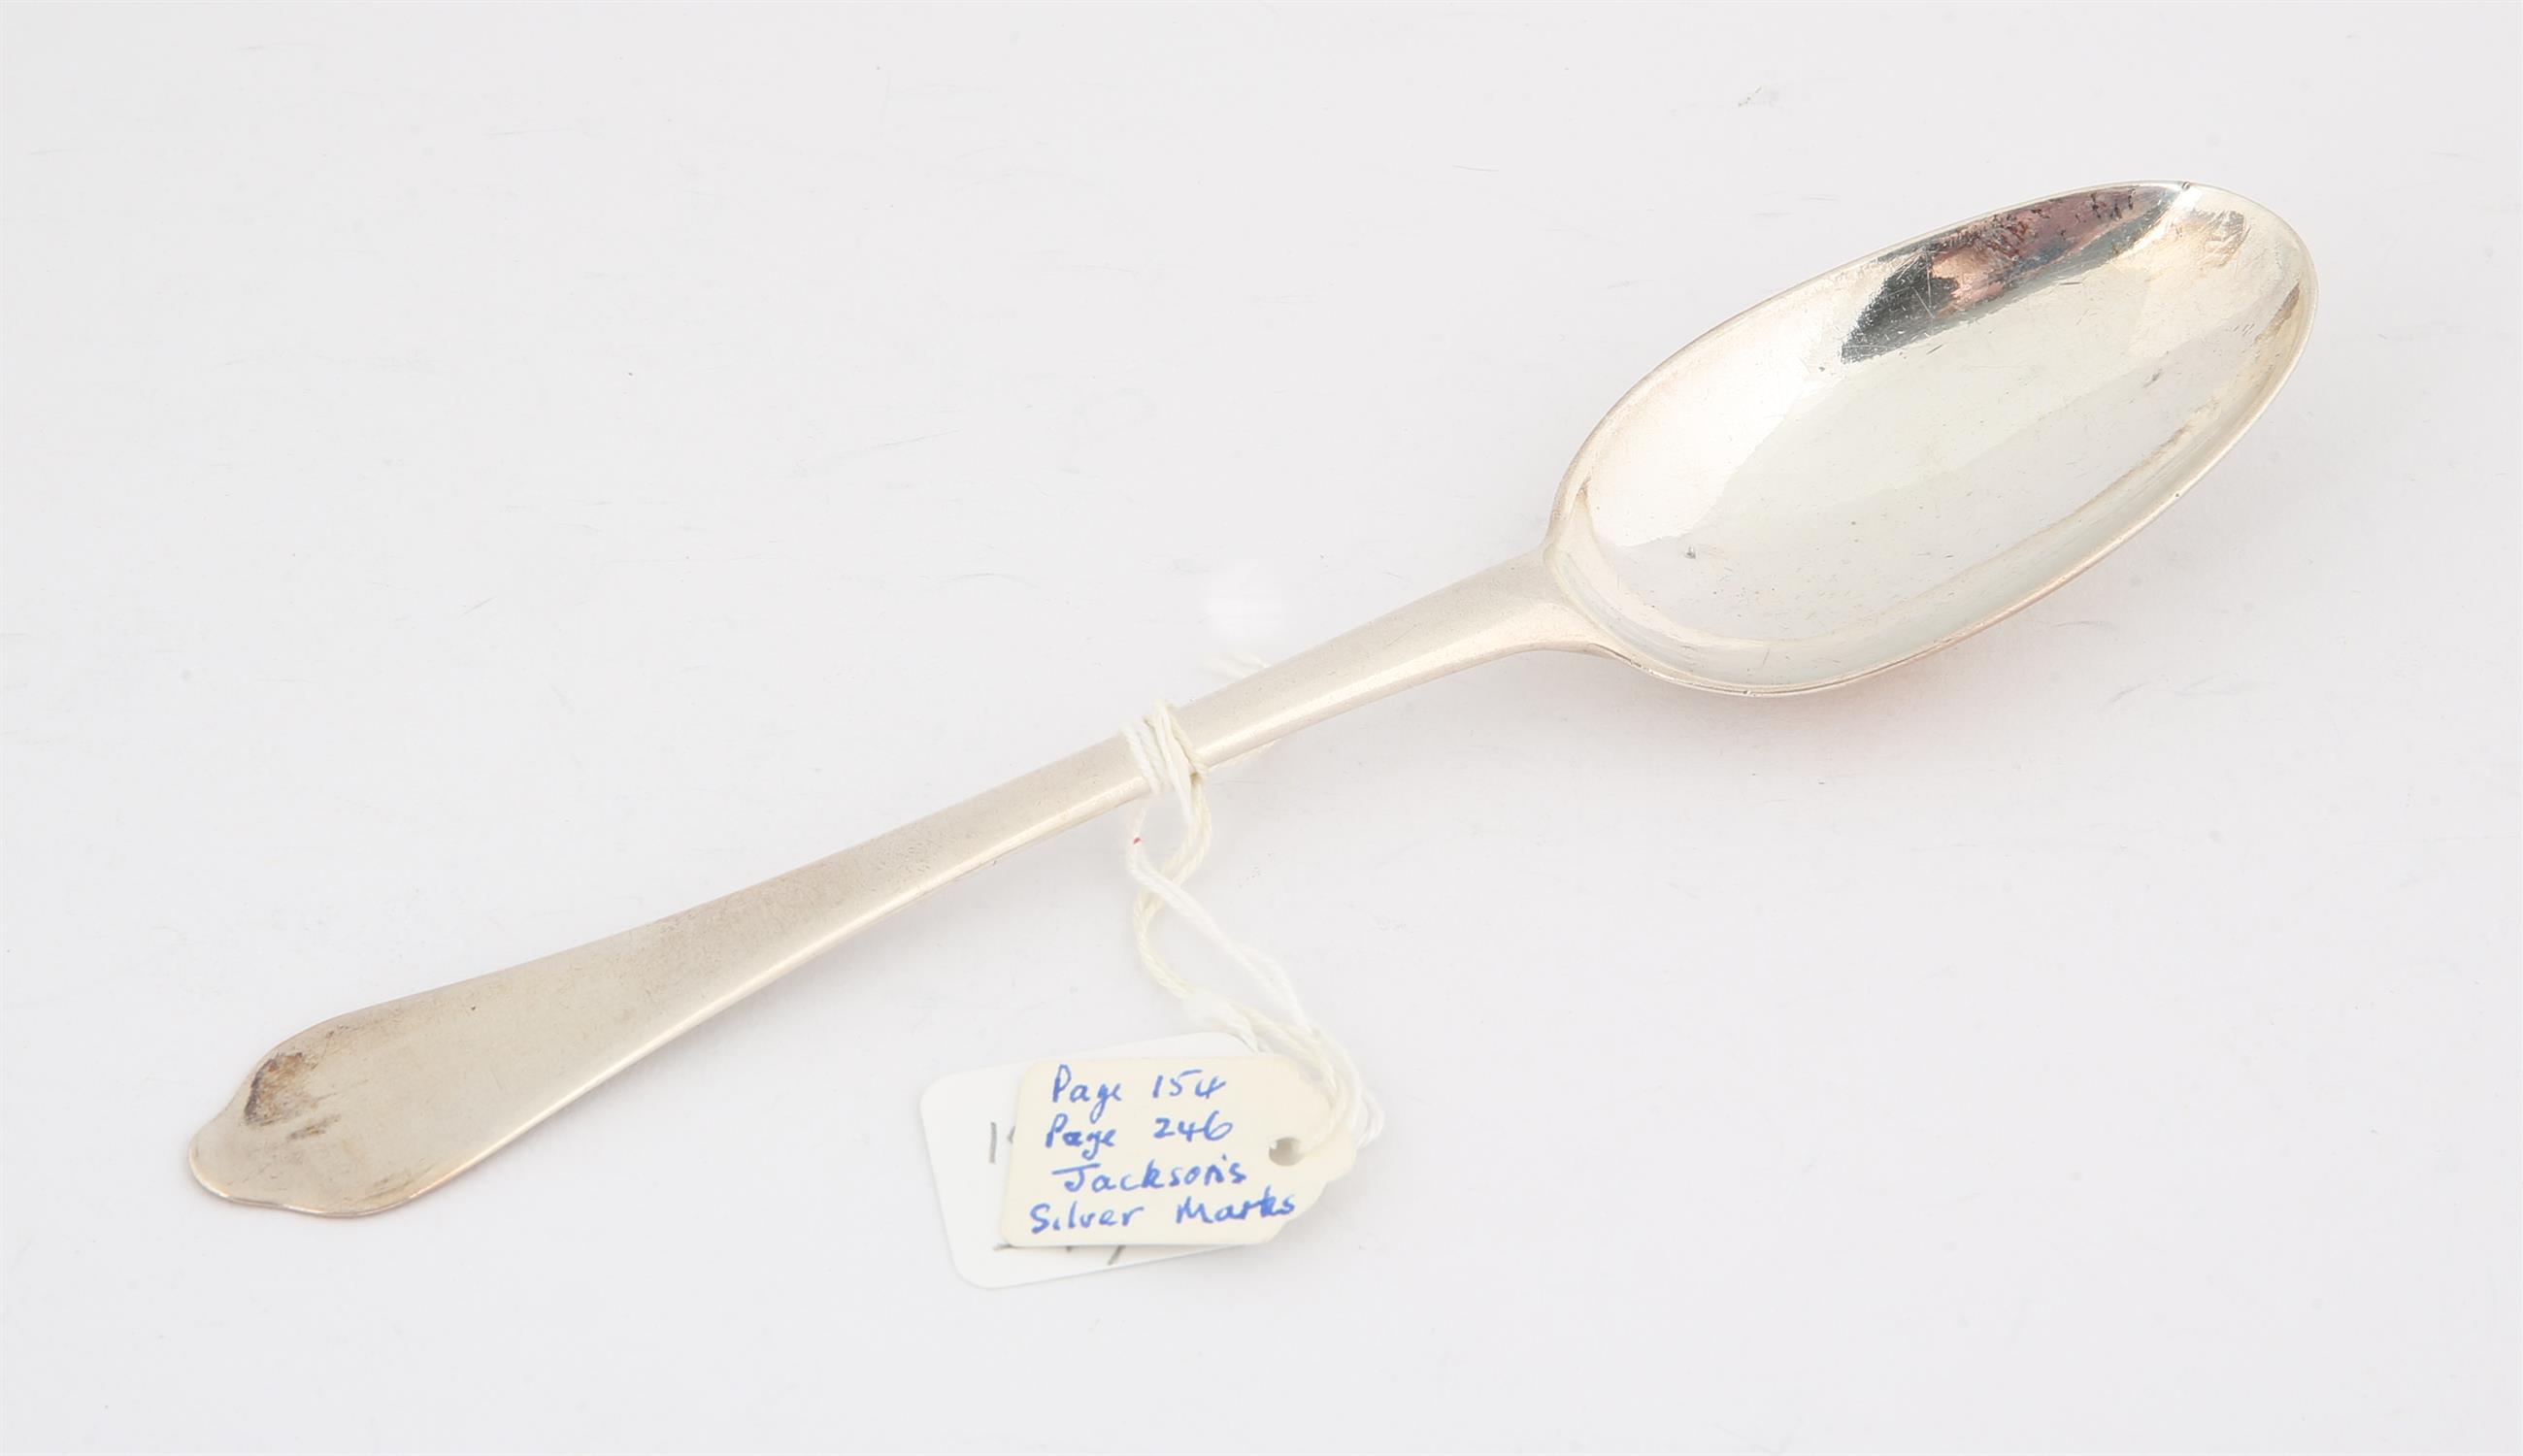 Late 17th century dog nose silver spoon, possibly by Benjamin Watts SILVER COLLECTION OF SIR RAY - Image 3 of 4